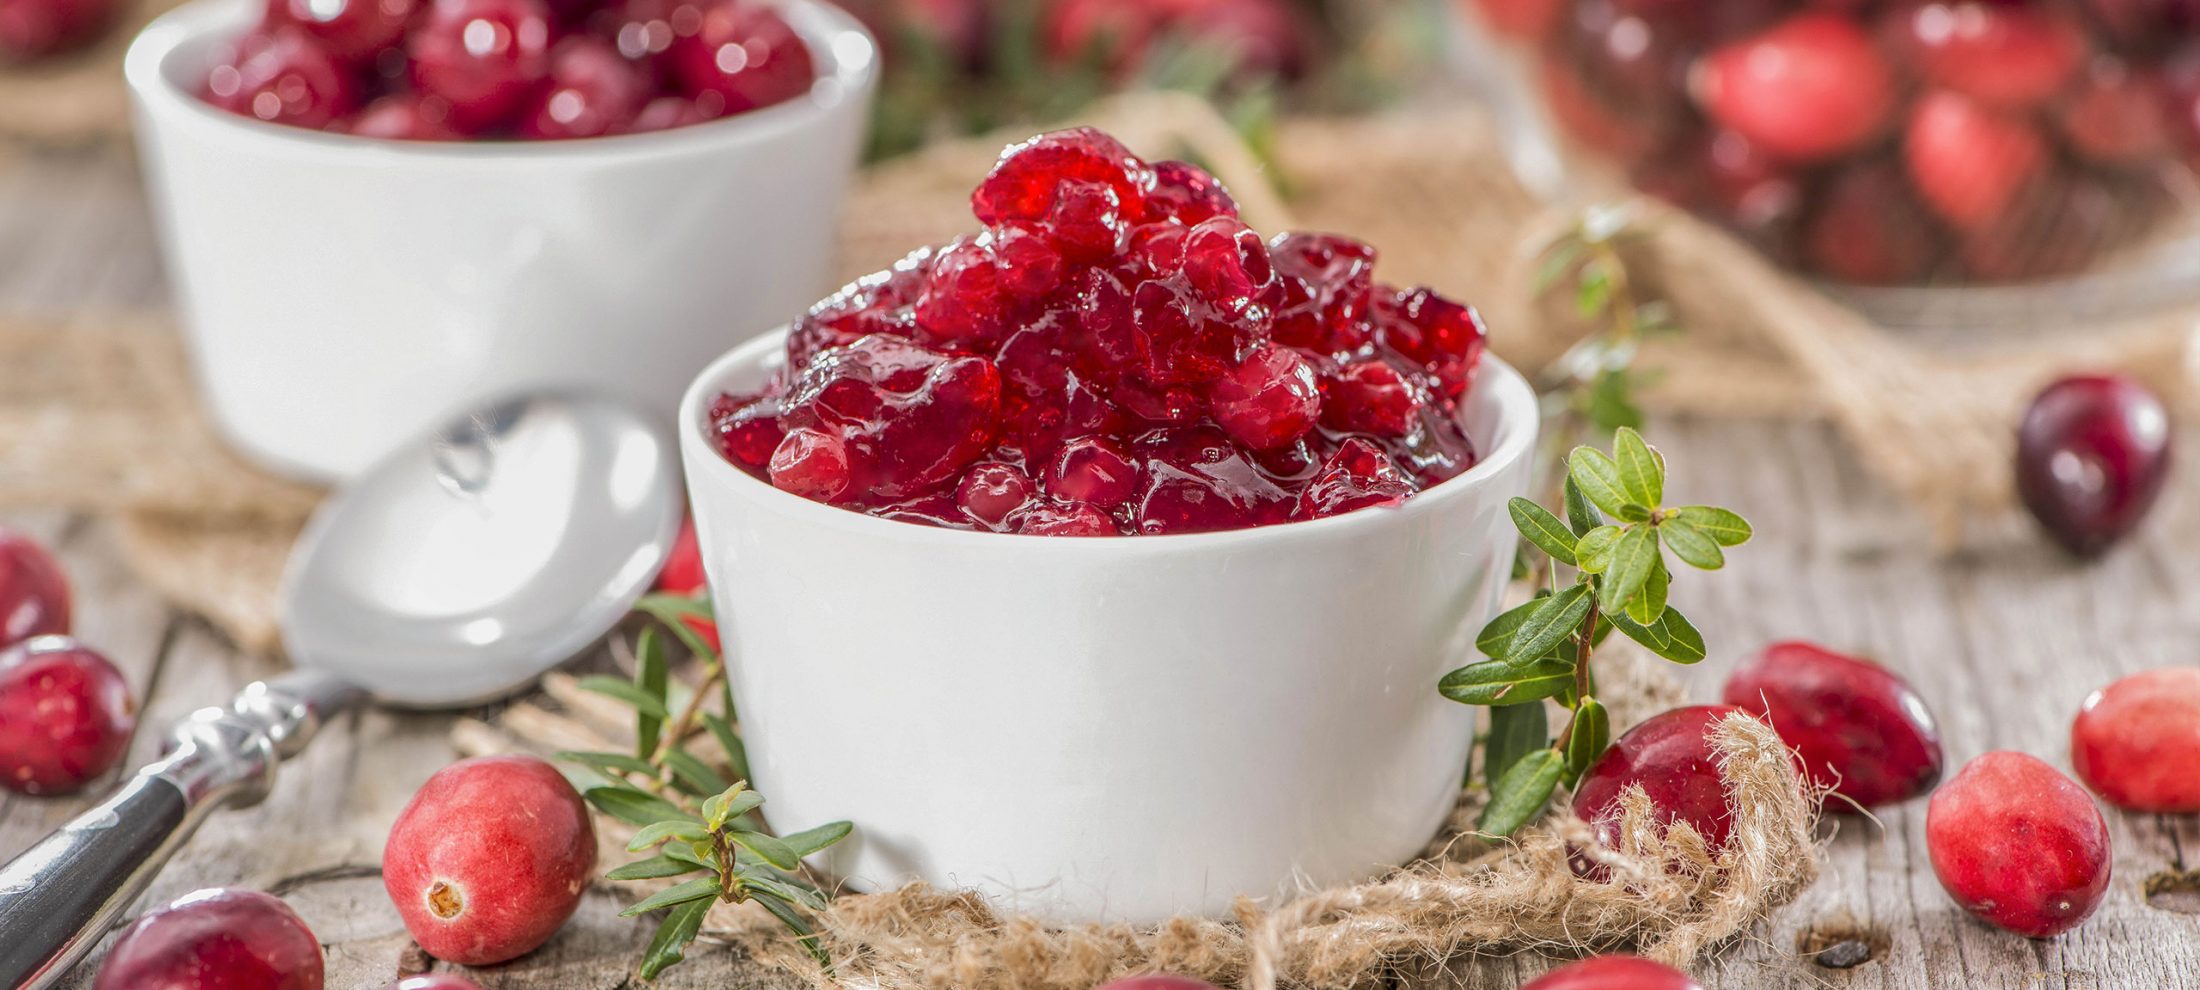 Spicy Cranberries Recipe - Savory Snacks - S. Martinelli &amp; Co